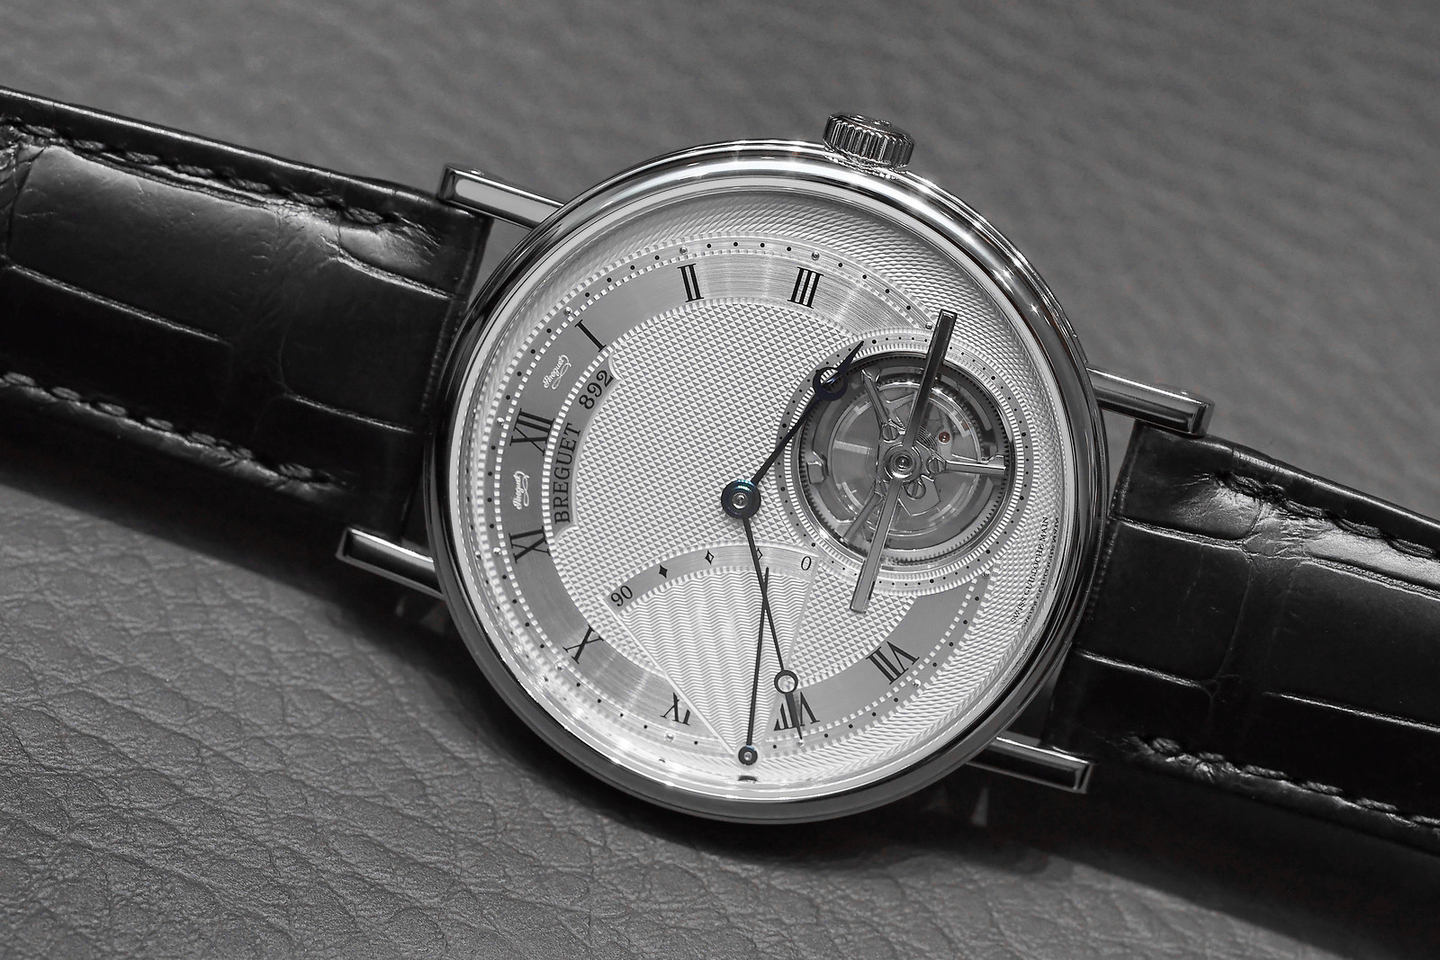 Hands-On with the Breguet Classique Tourbillon Extra-Thin Automatic 5377 in Platinum